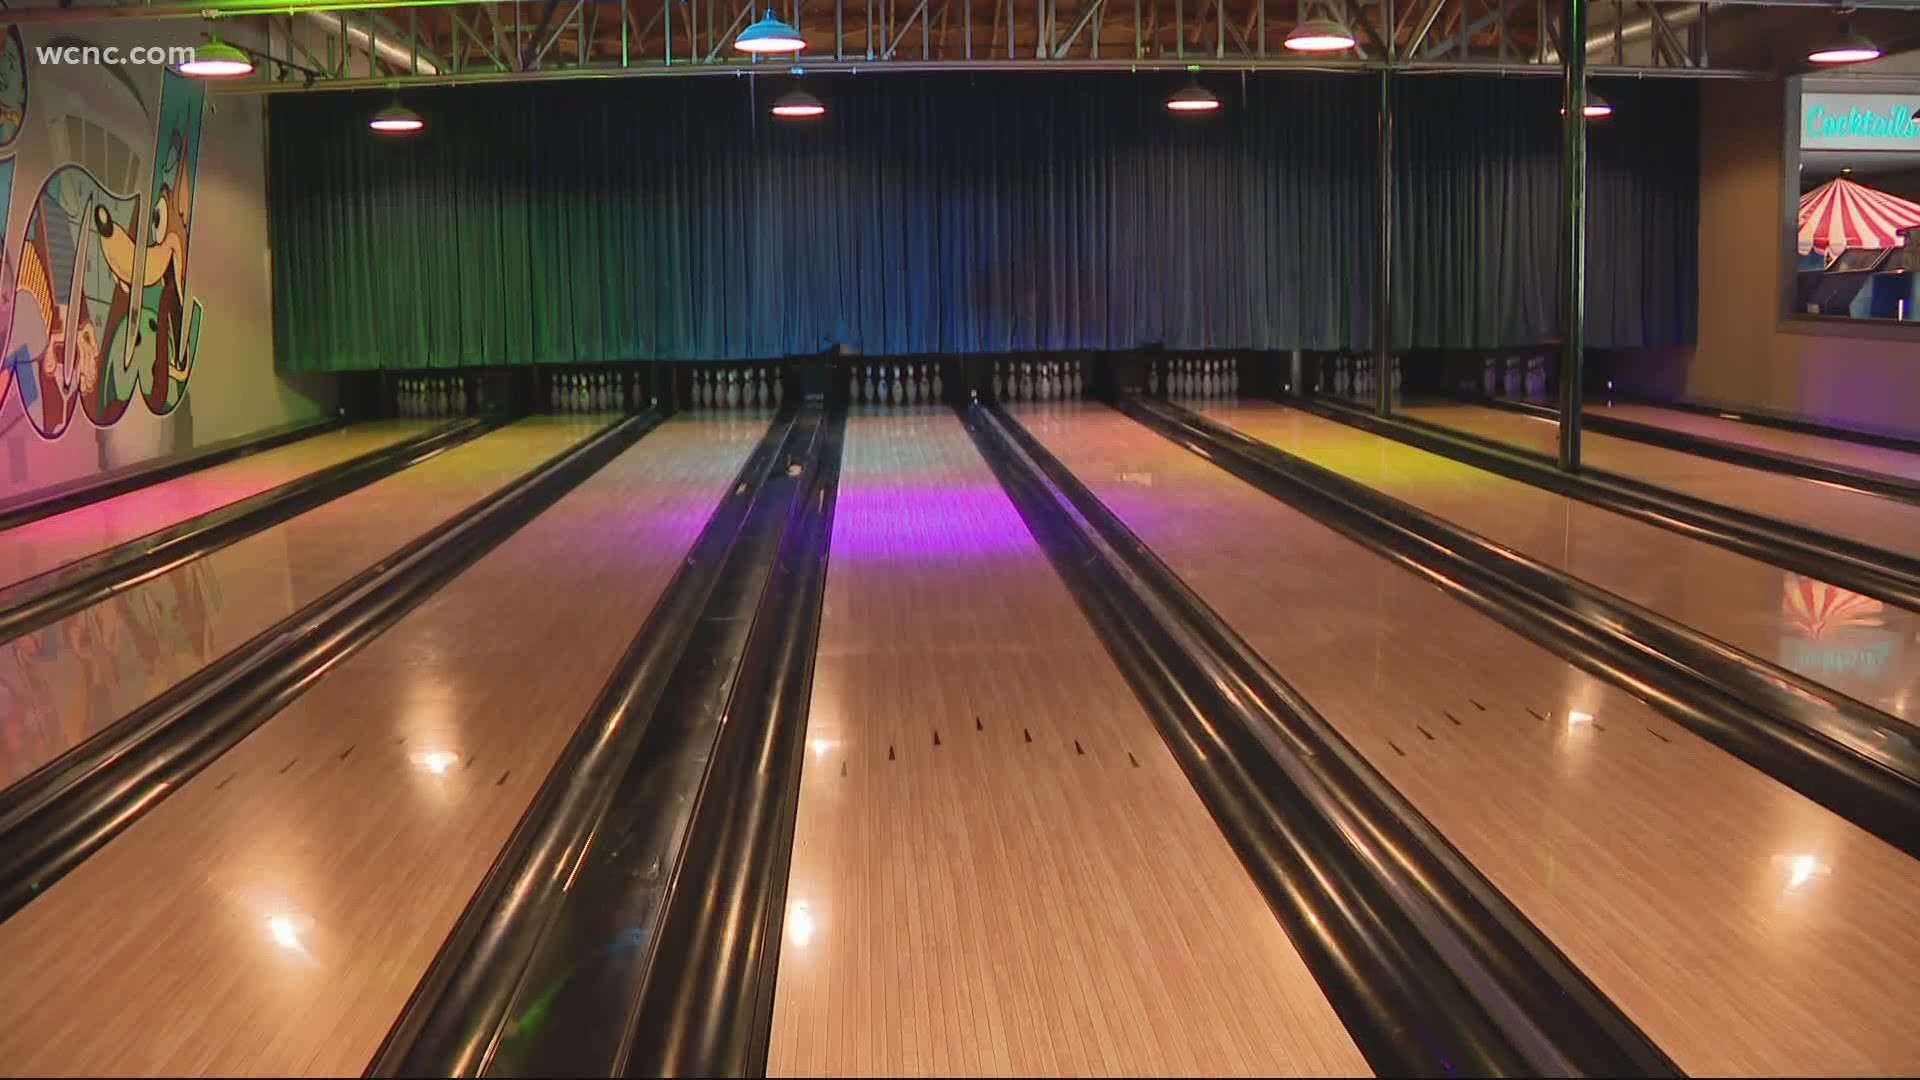 Governor Cooper pushed back reopening these businesses in his phased plan and vetoed legislation the general assembly passed regarding bowling alleys